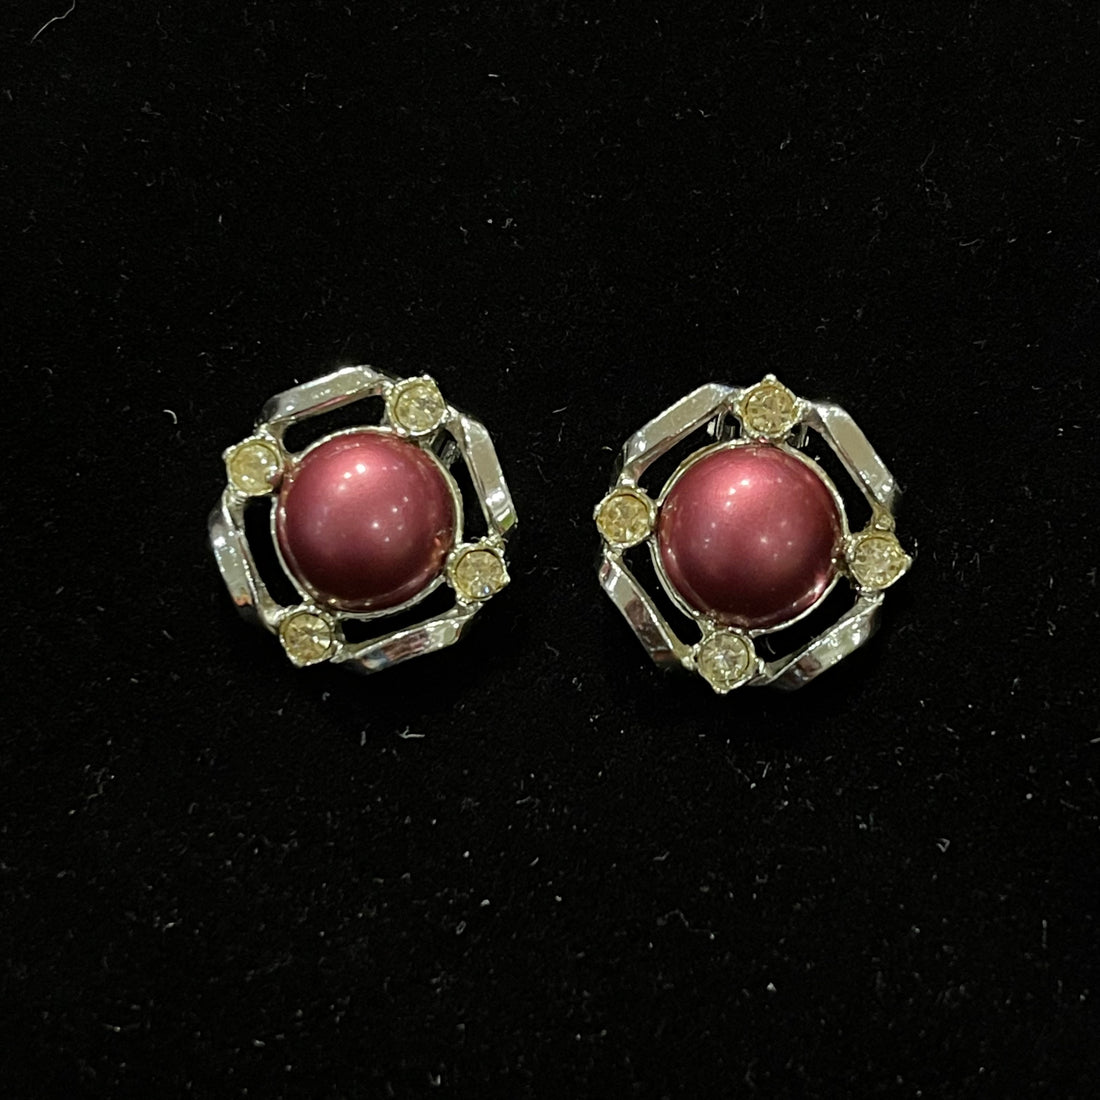 Vintage Silver and Rhinestone with Burgundy Center Clip-On Earrings